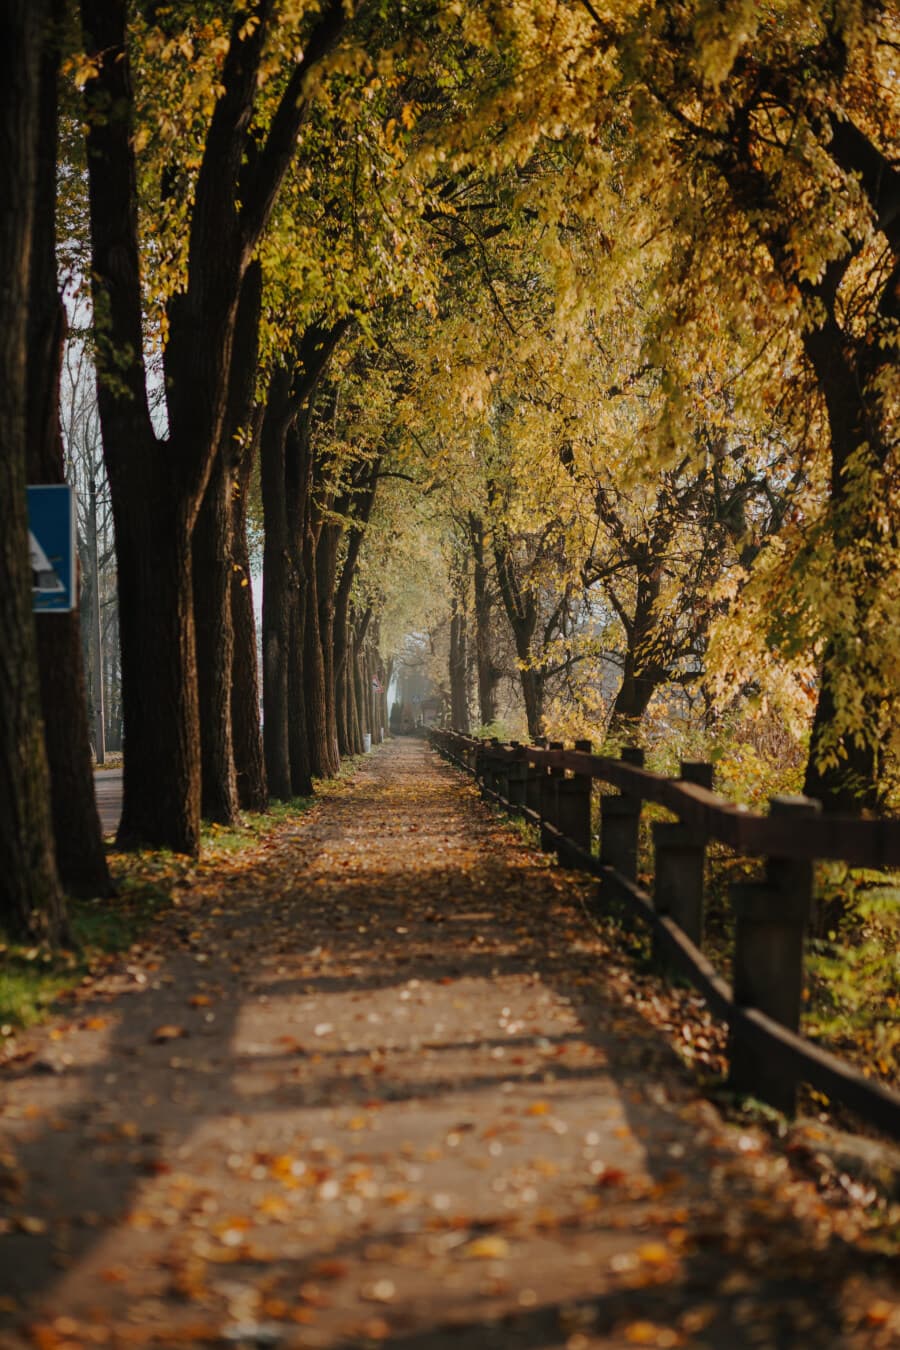 alley, road, walkway, fence, branches, autumn, landscape, tree, trees, park